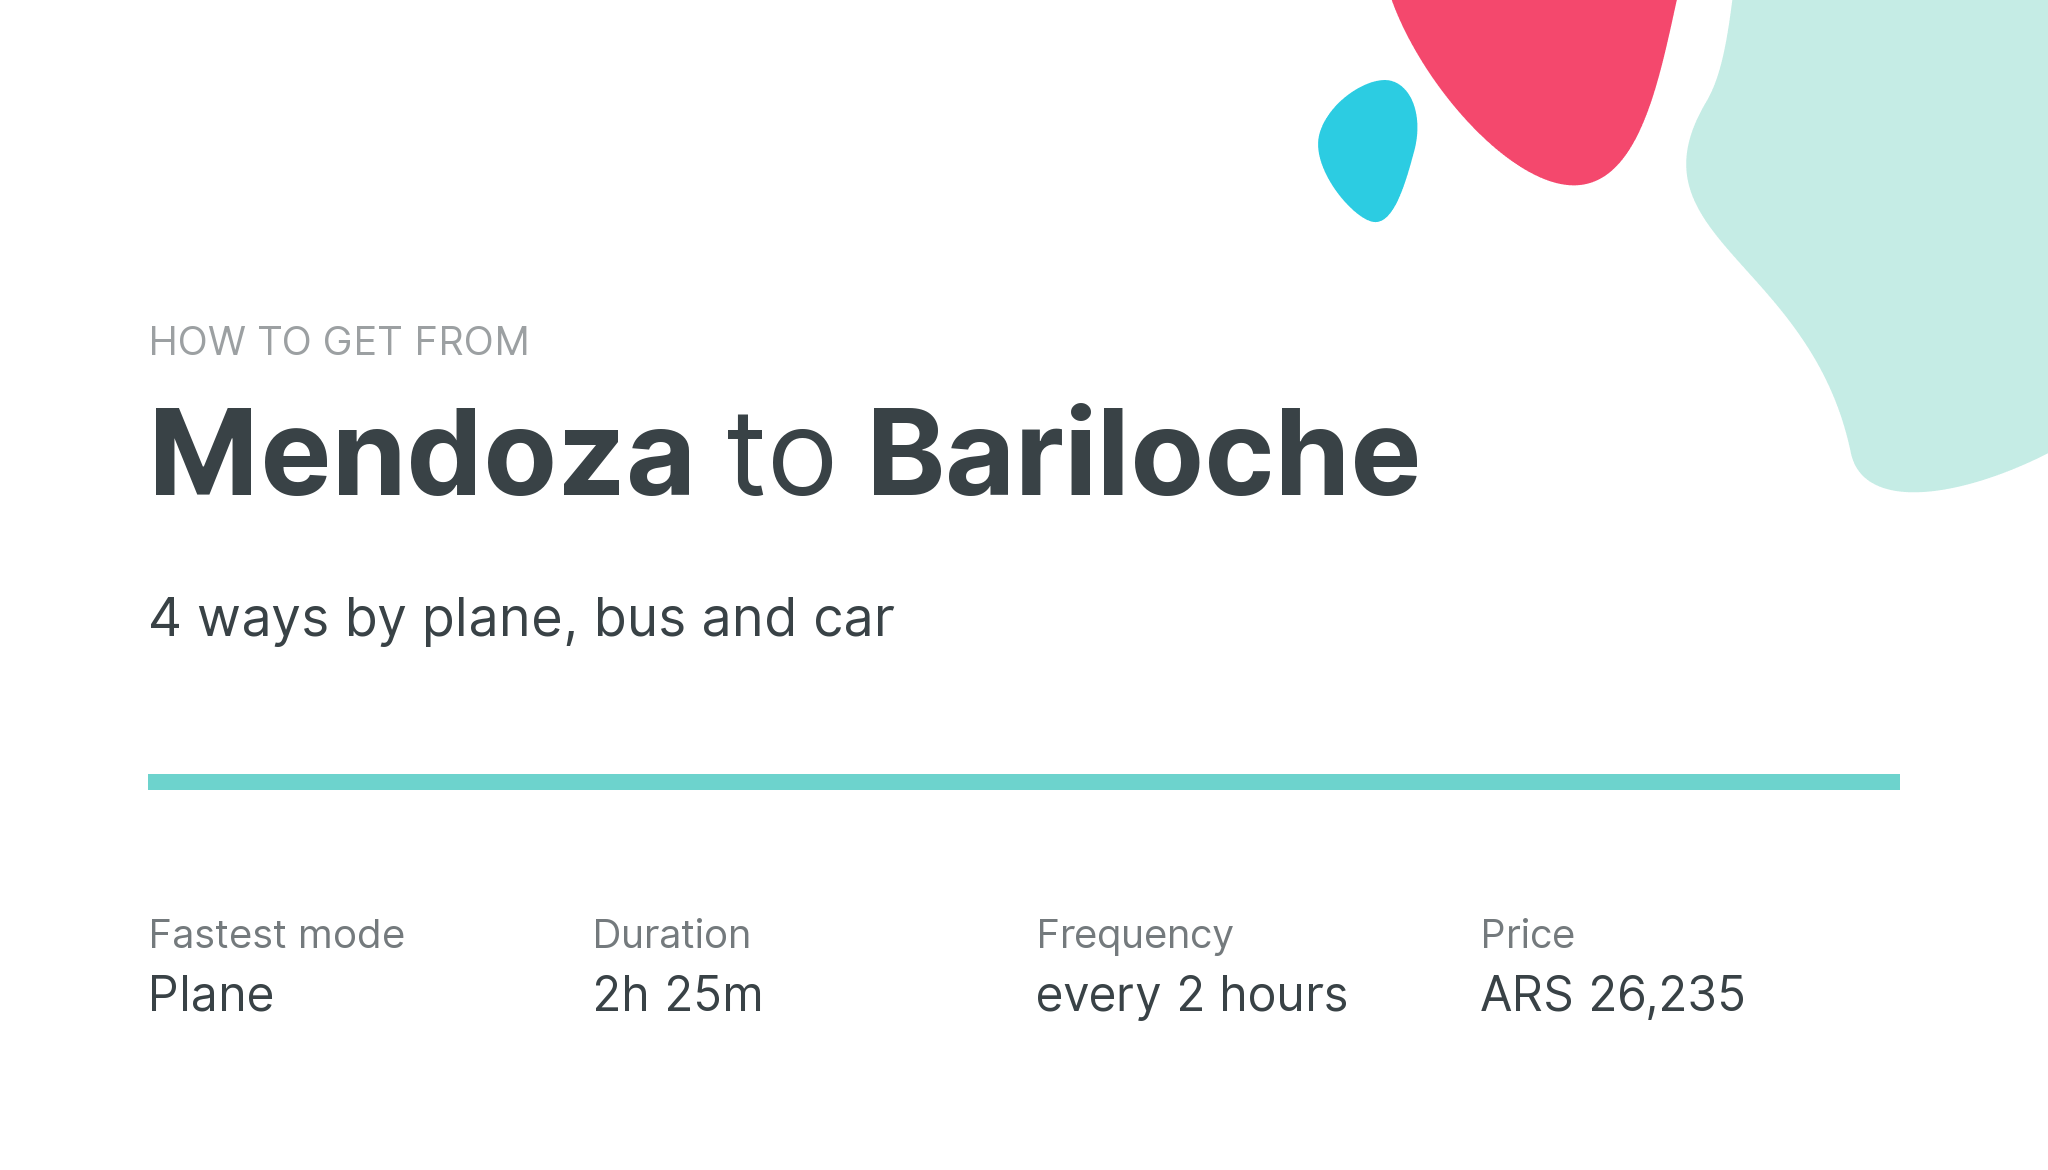 How do I get from Mendoza to Bariloche